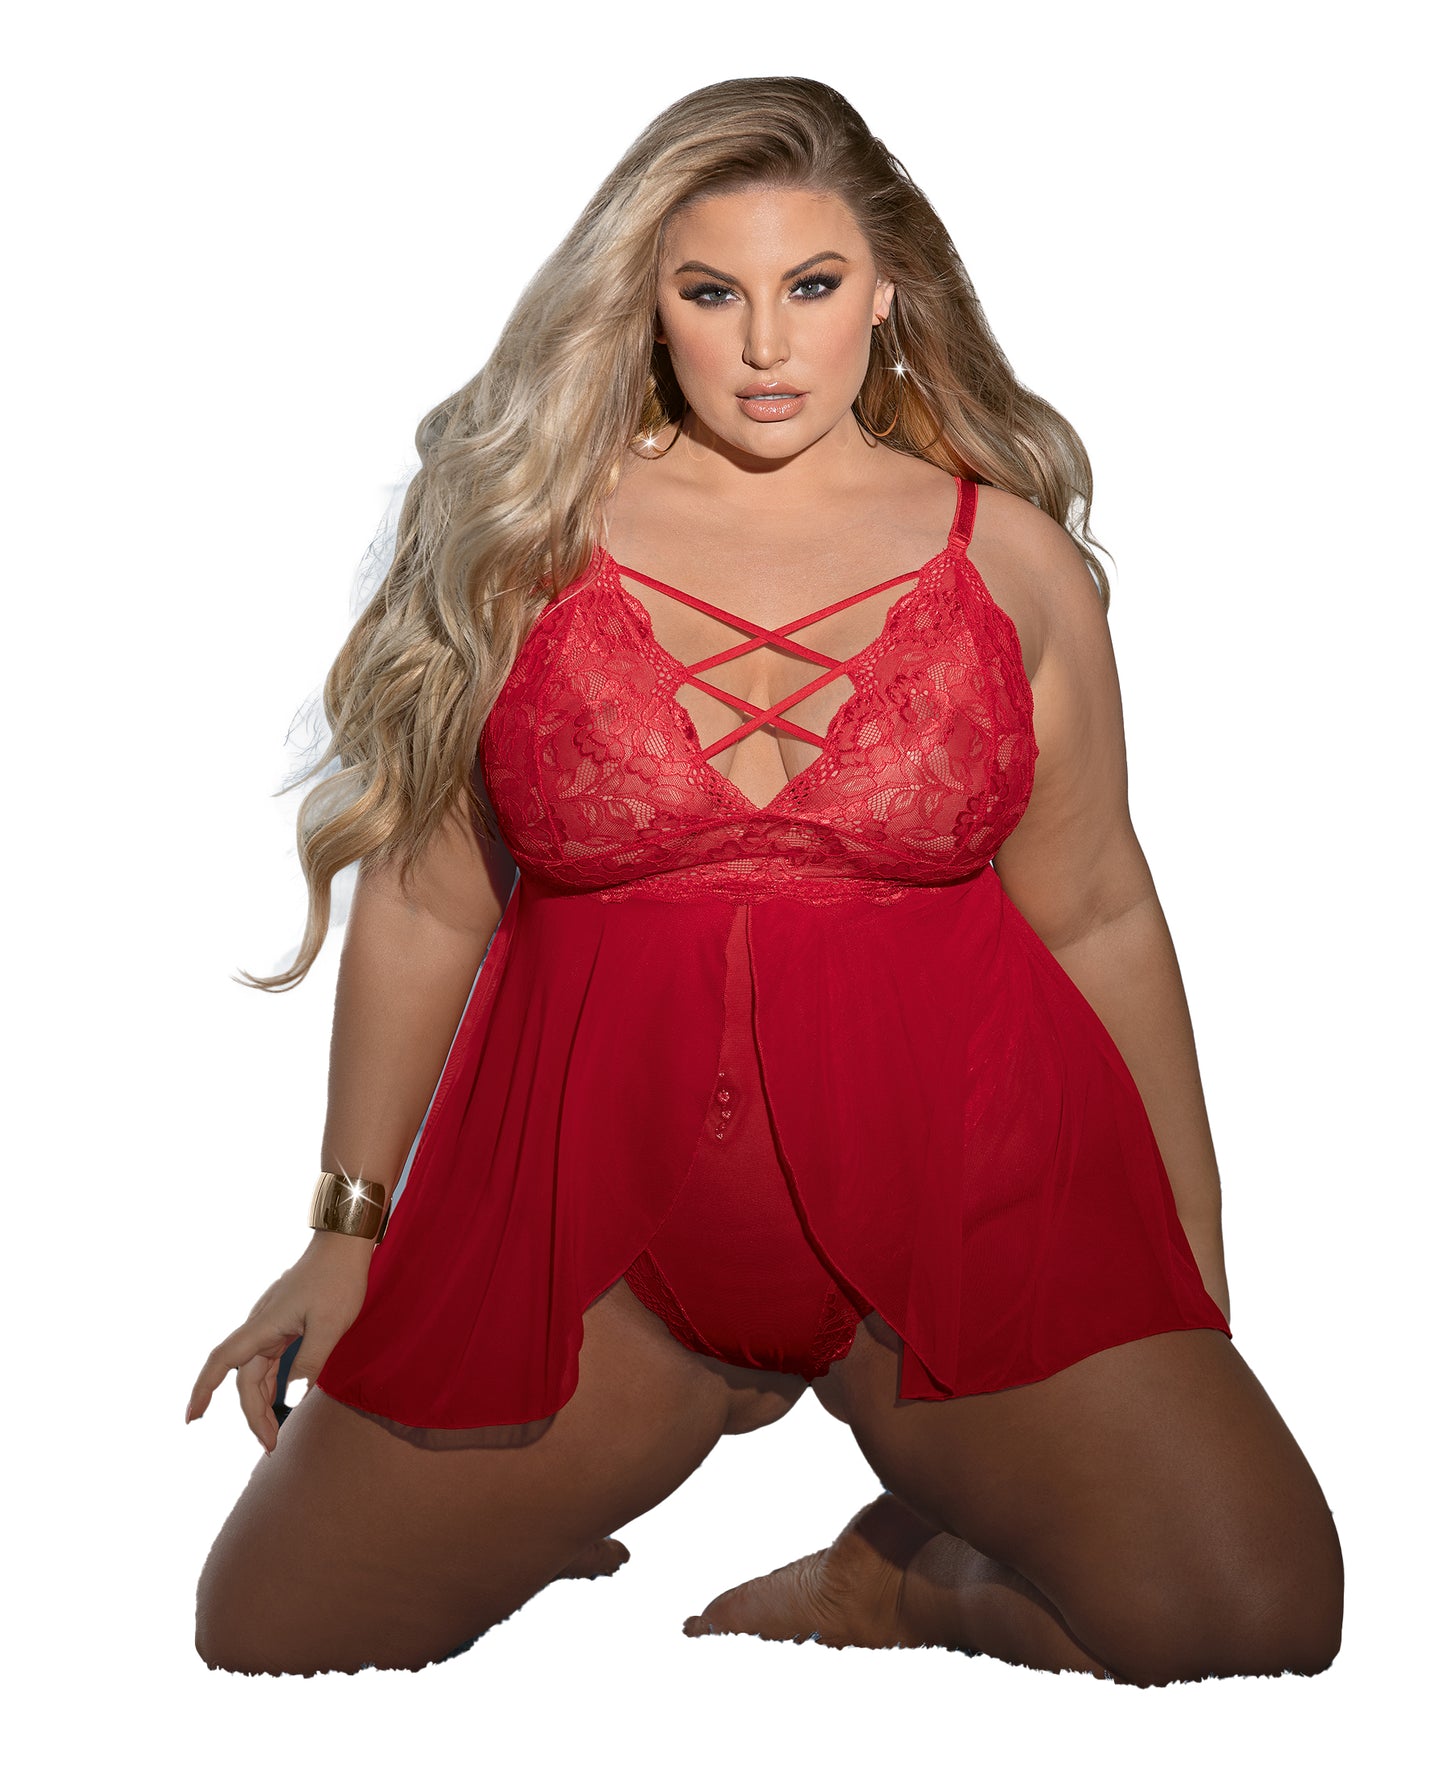 30442X Lace & Mesh Teddydoll Red front view